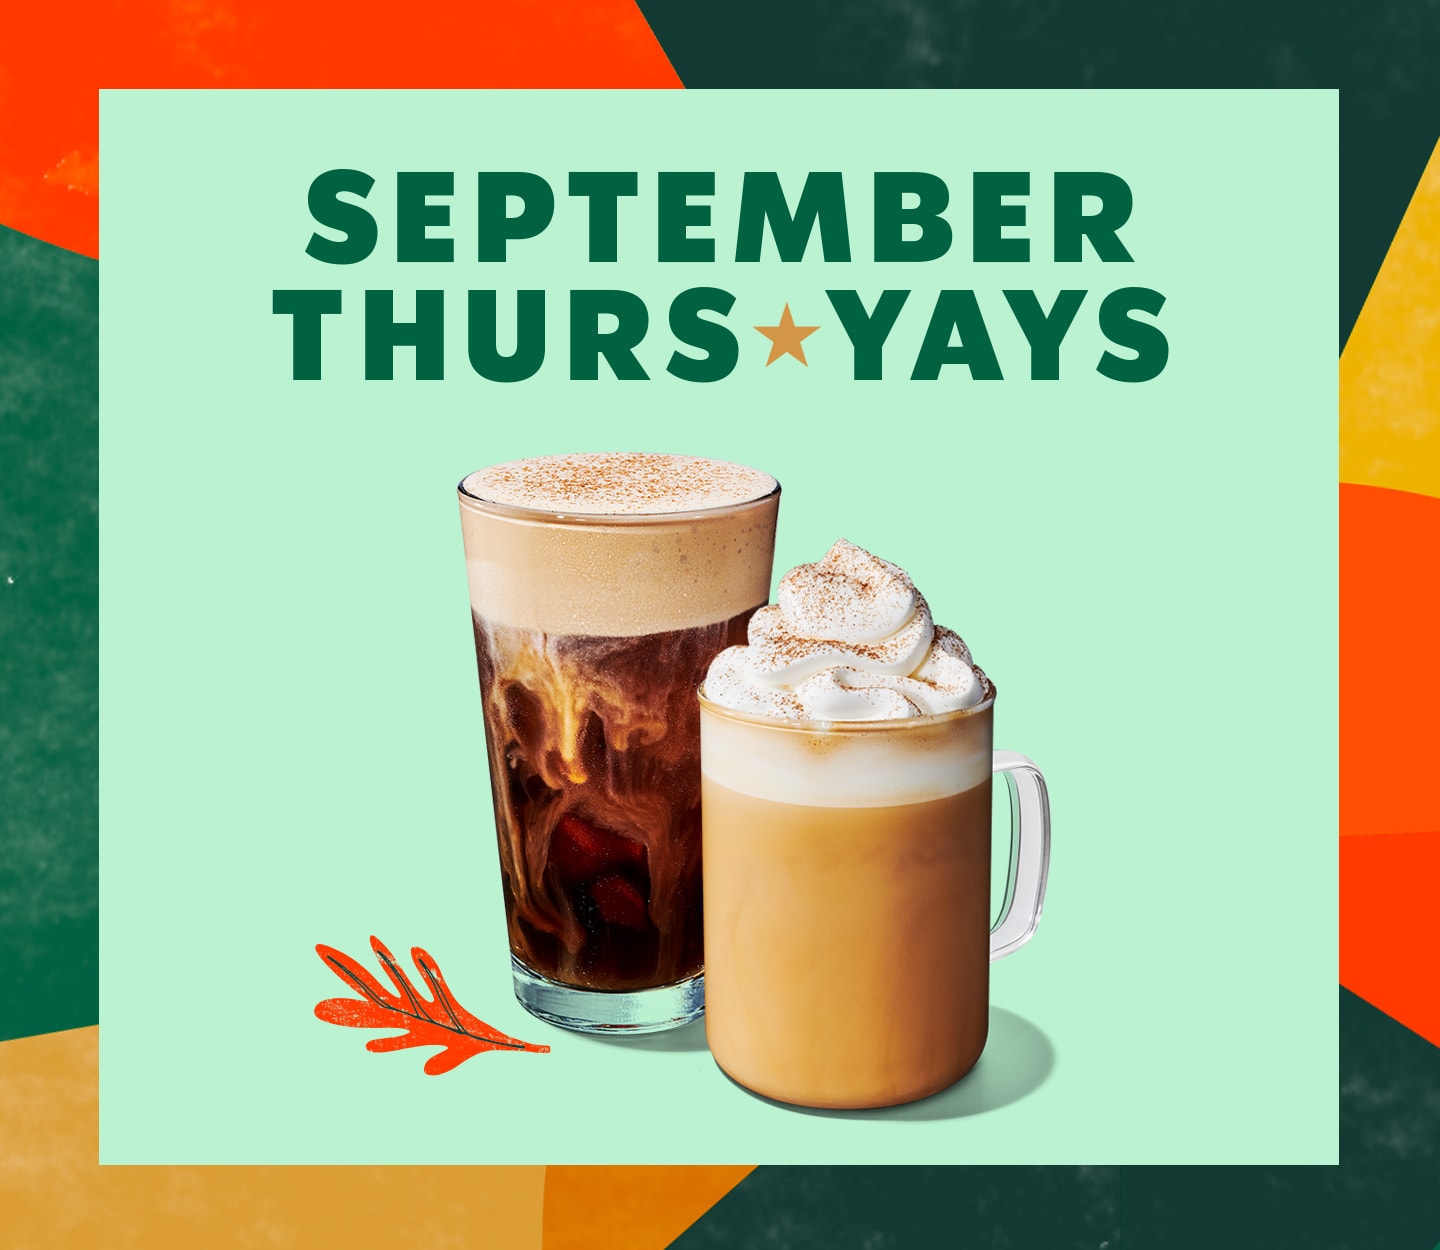 September ThursYays logo on a mint green background with falling leaves and two coffee drinks.